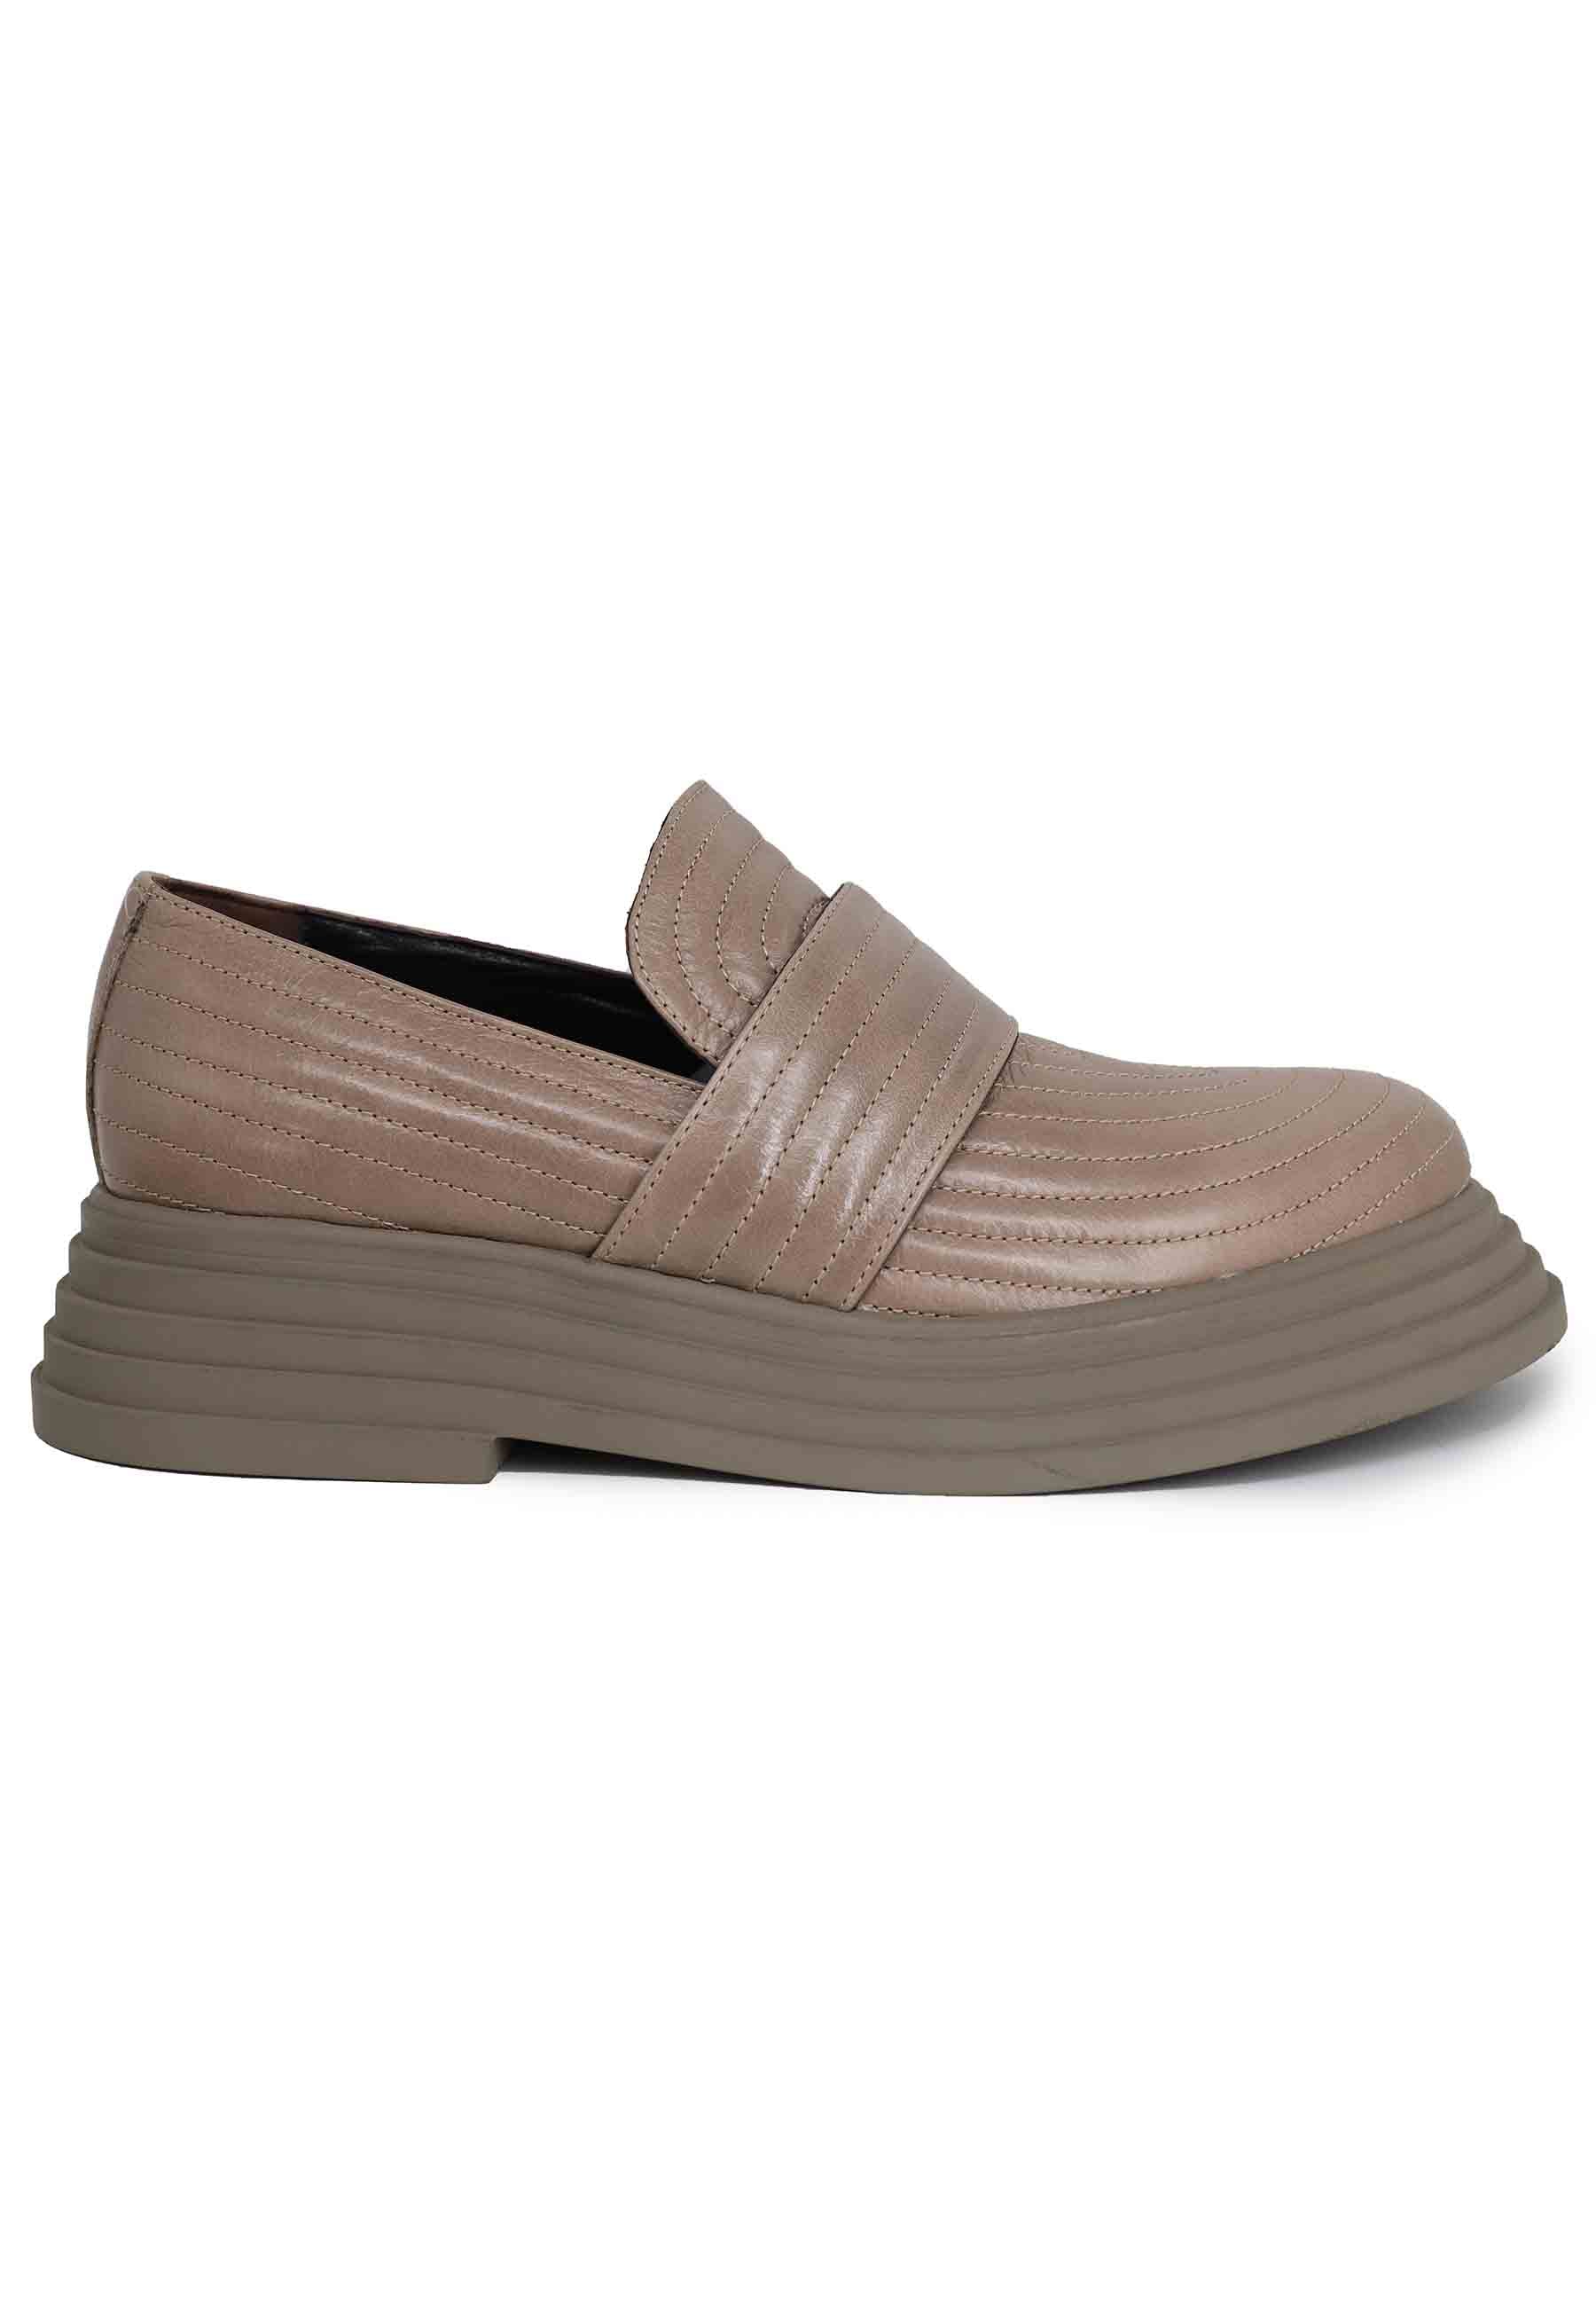 Women's moccasins in taupe leather with stitching and rubber sole